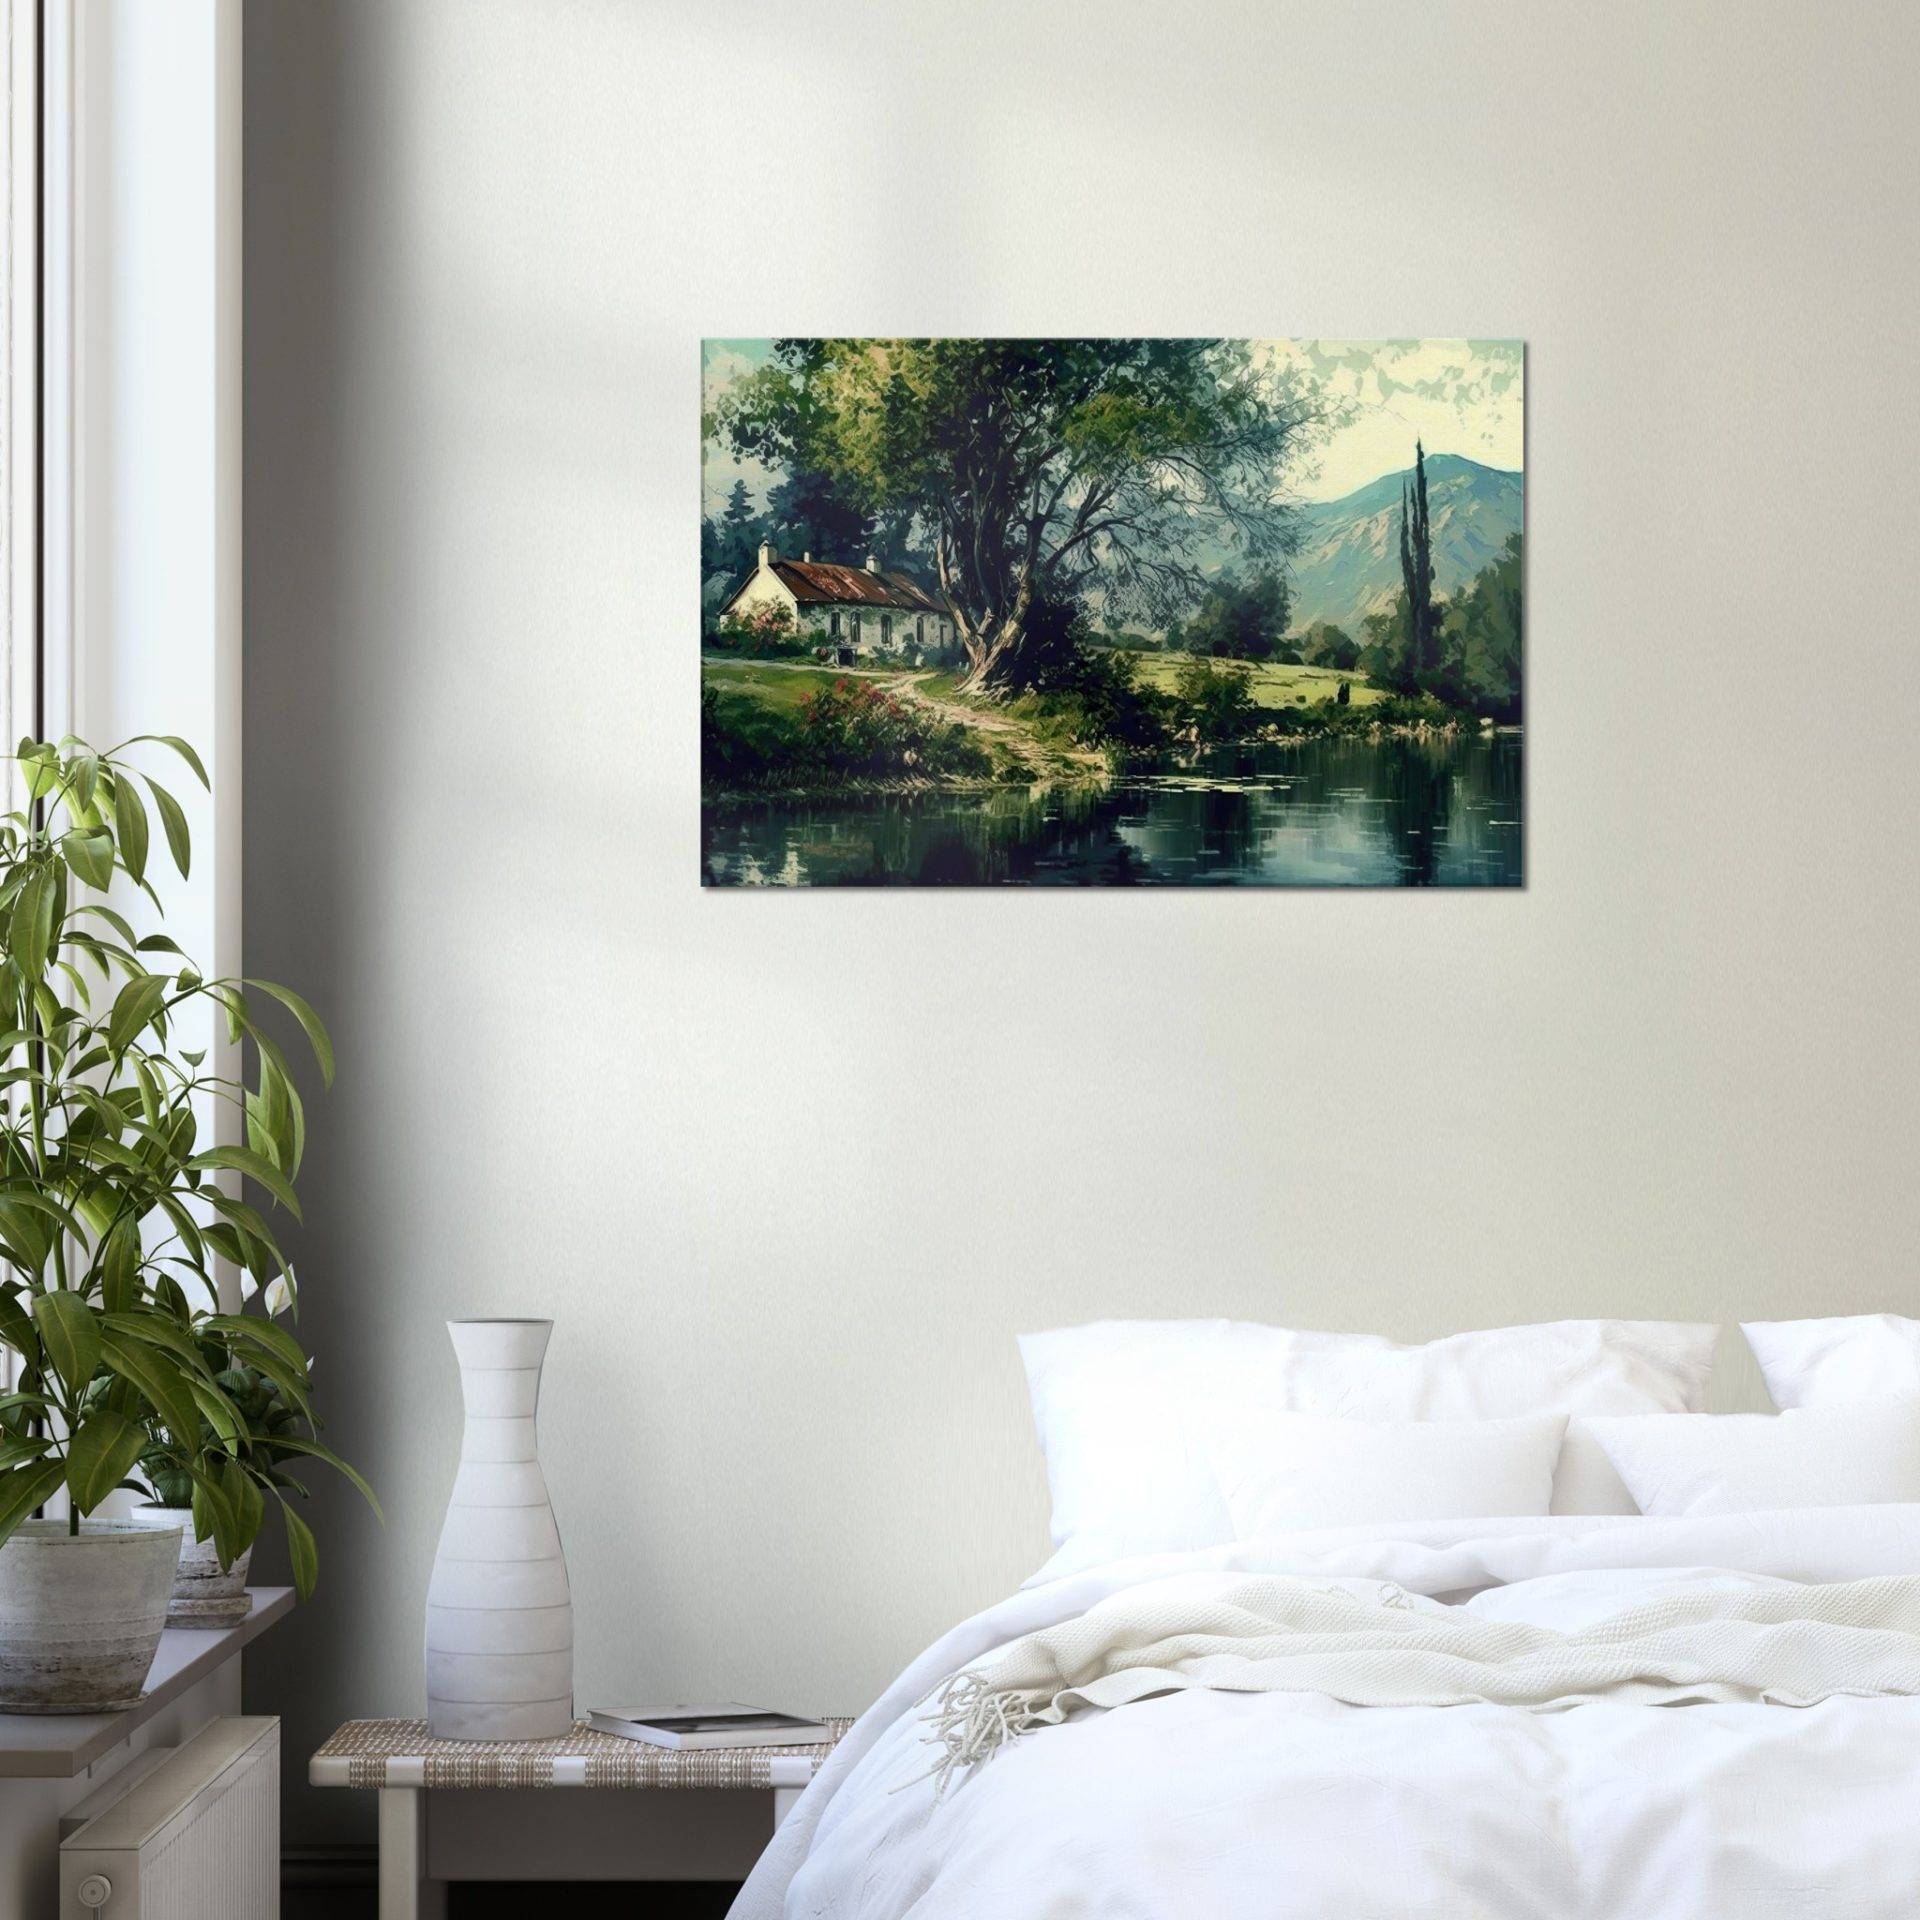 Tessin Landscape 4 (Canvas Print) Fabled Gallery https://fabledgallery.art/?post_type=product&p=37110